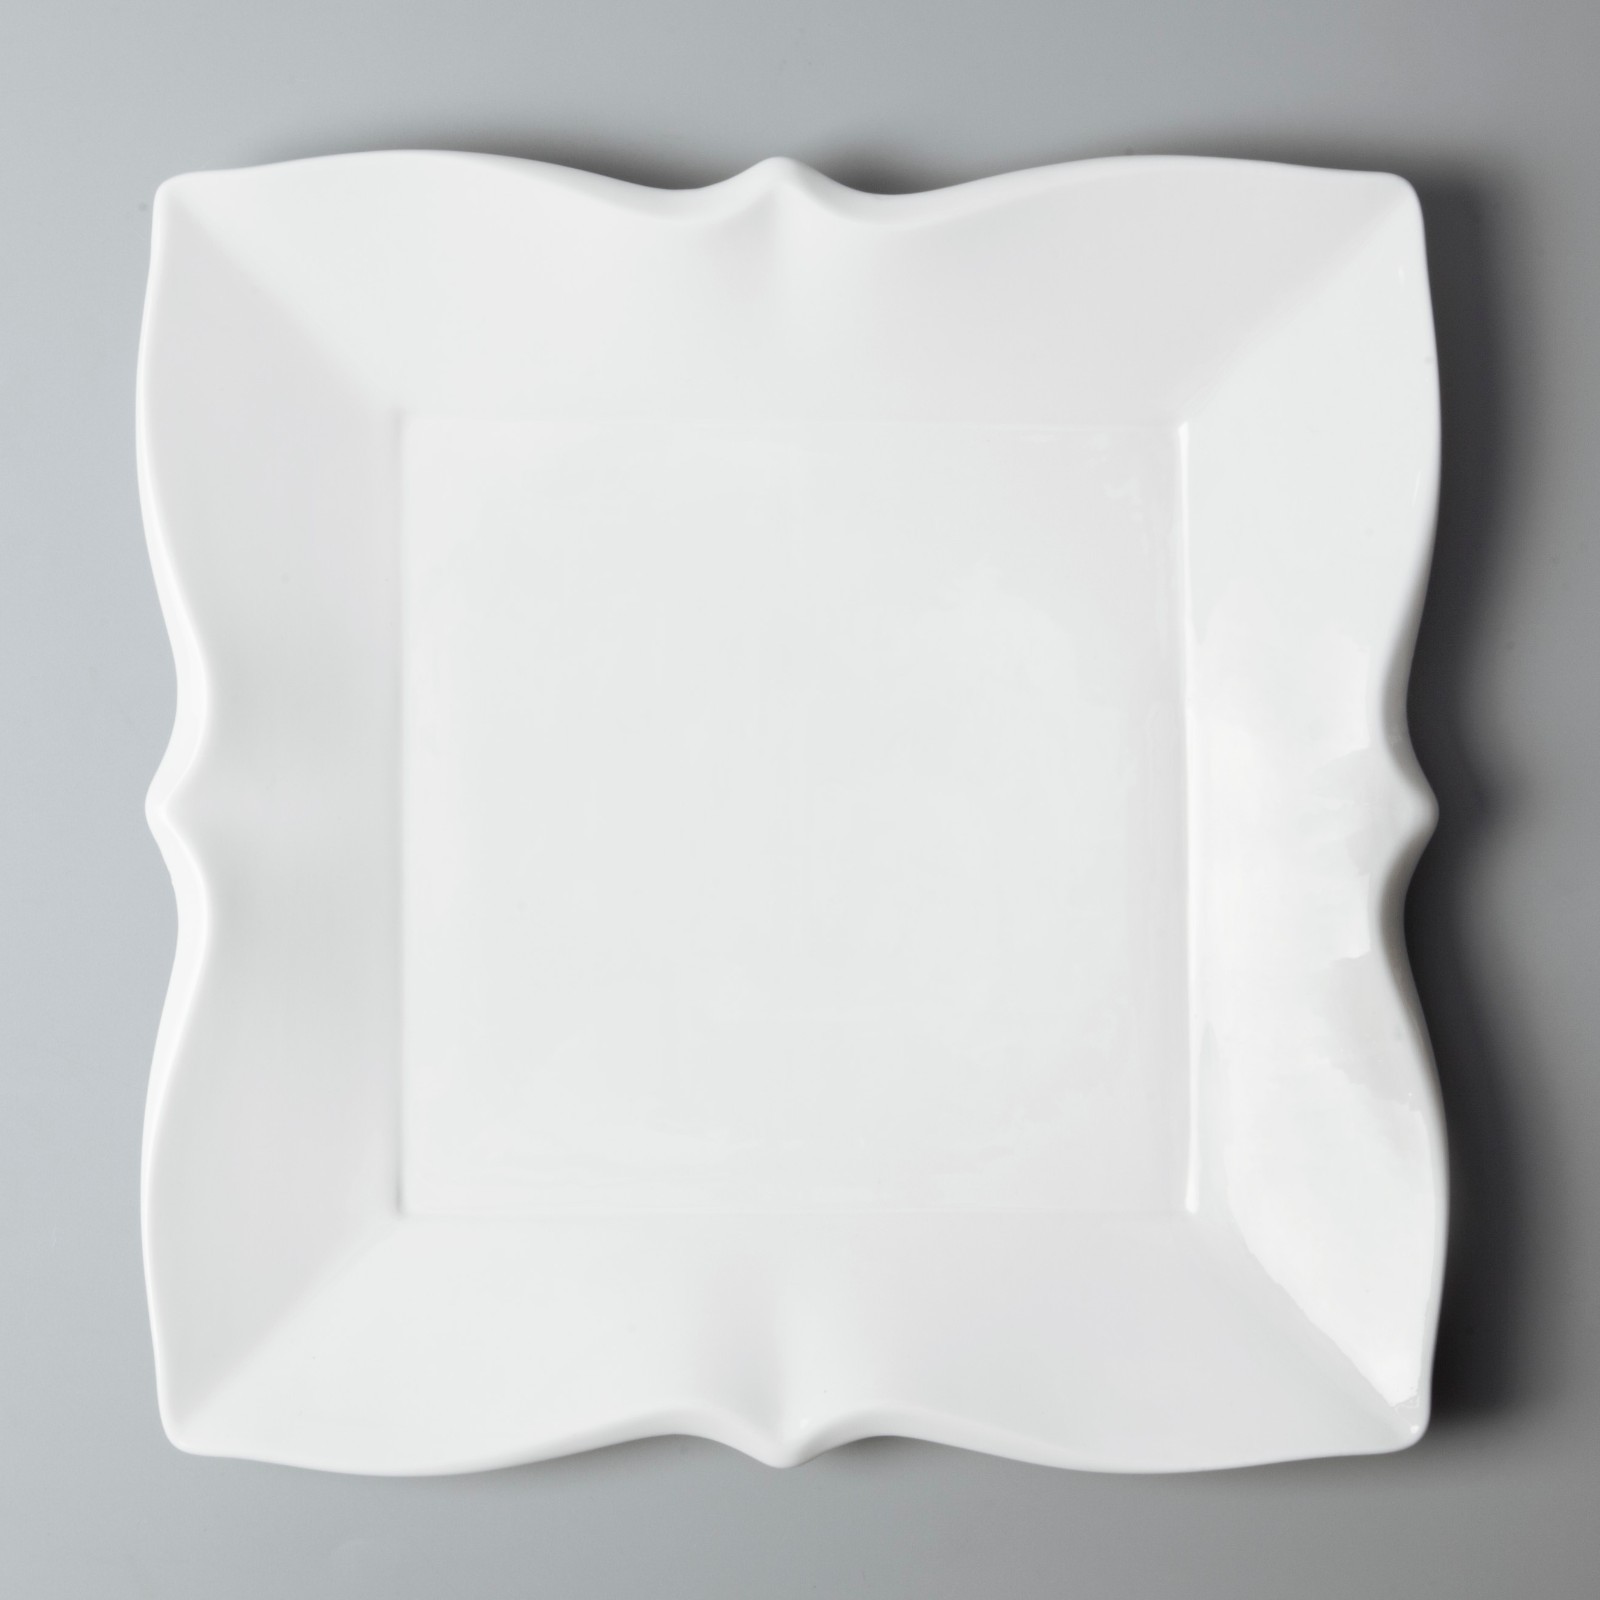 surface modern white porcelain tableware style Two Eight company